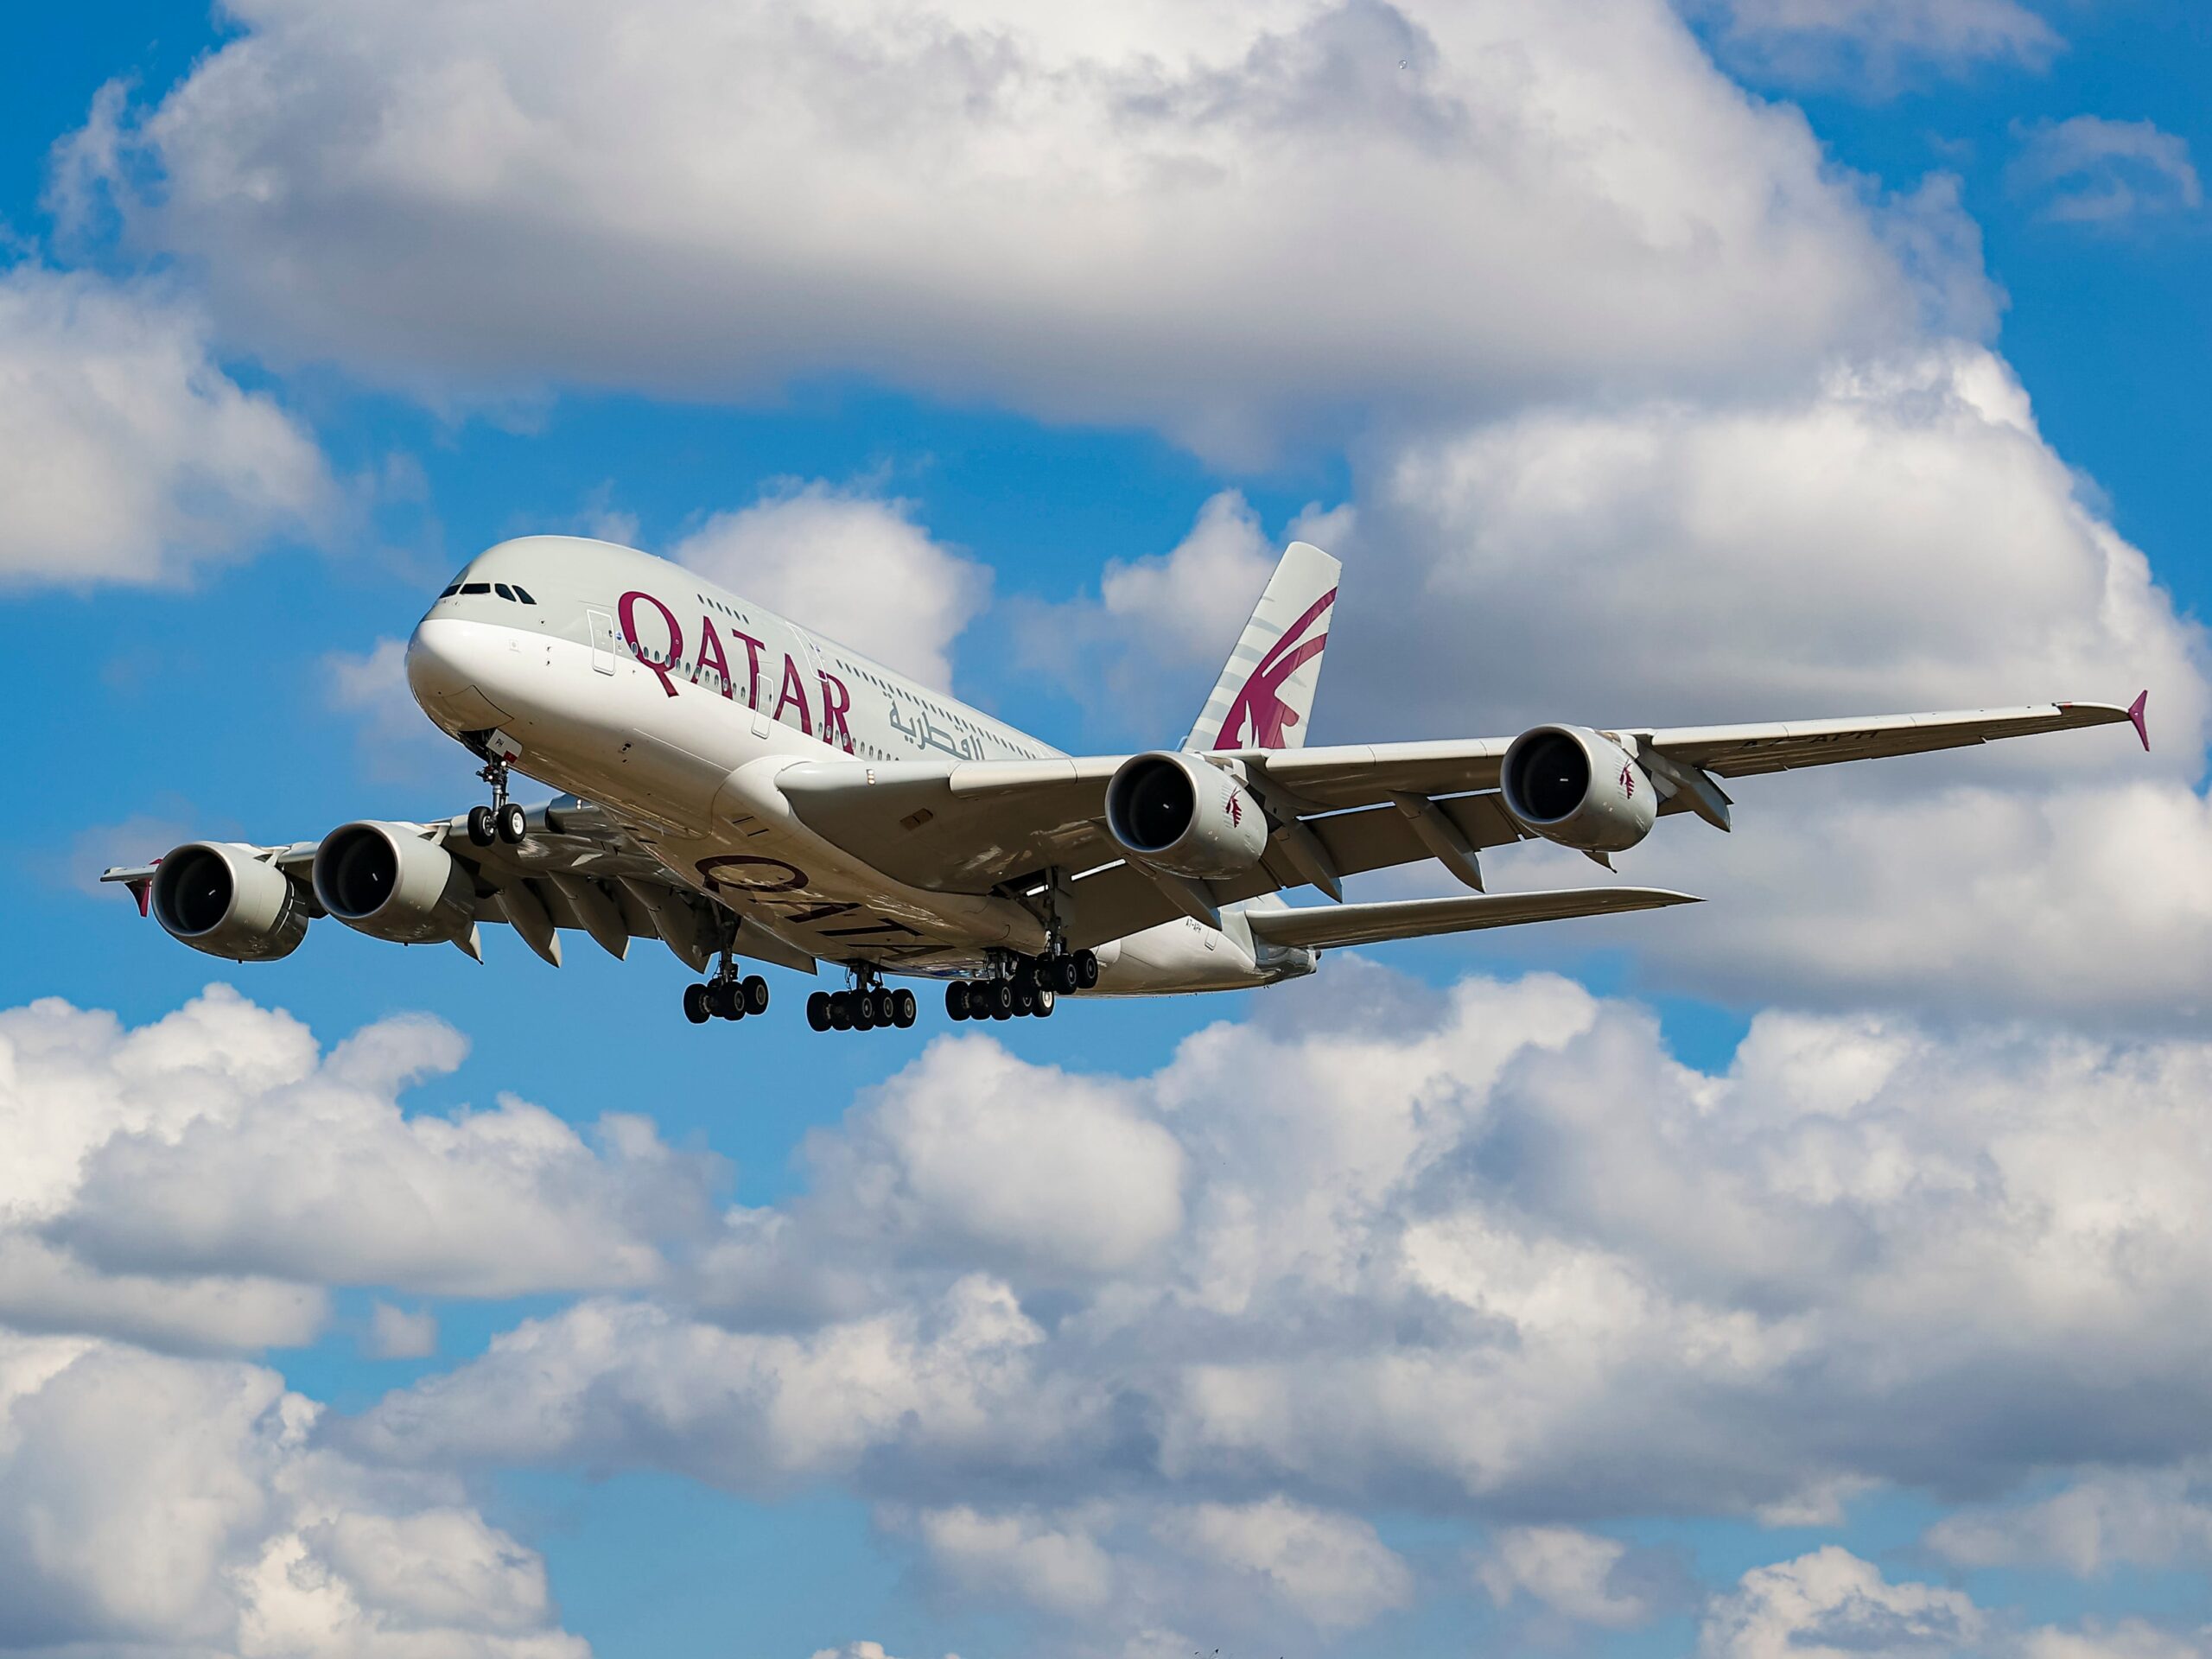 A Qatar flight in the air with clouds above it